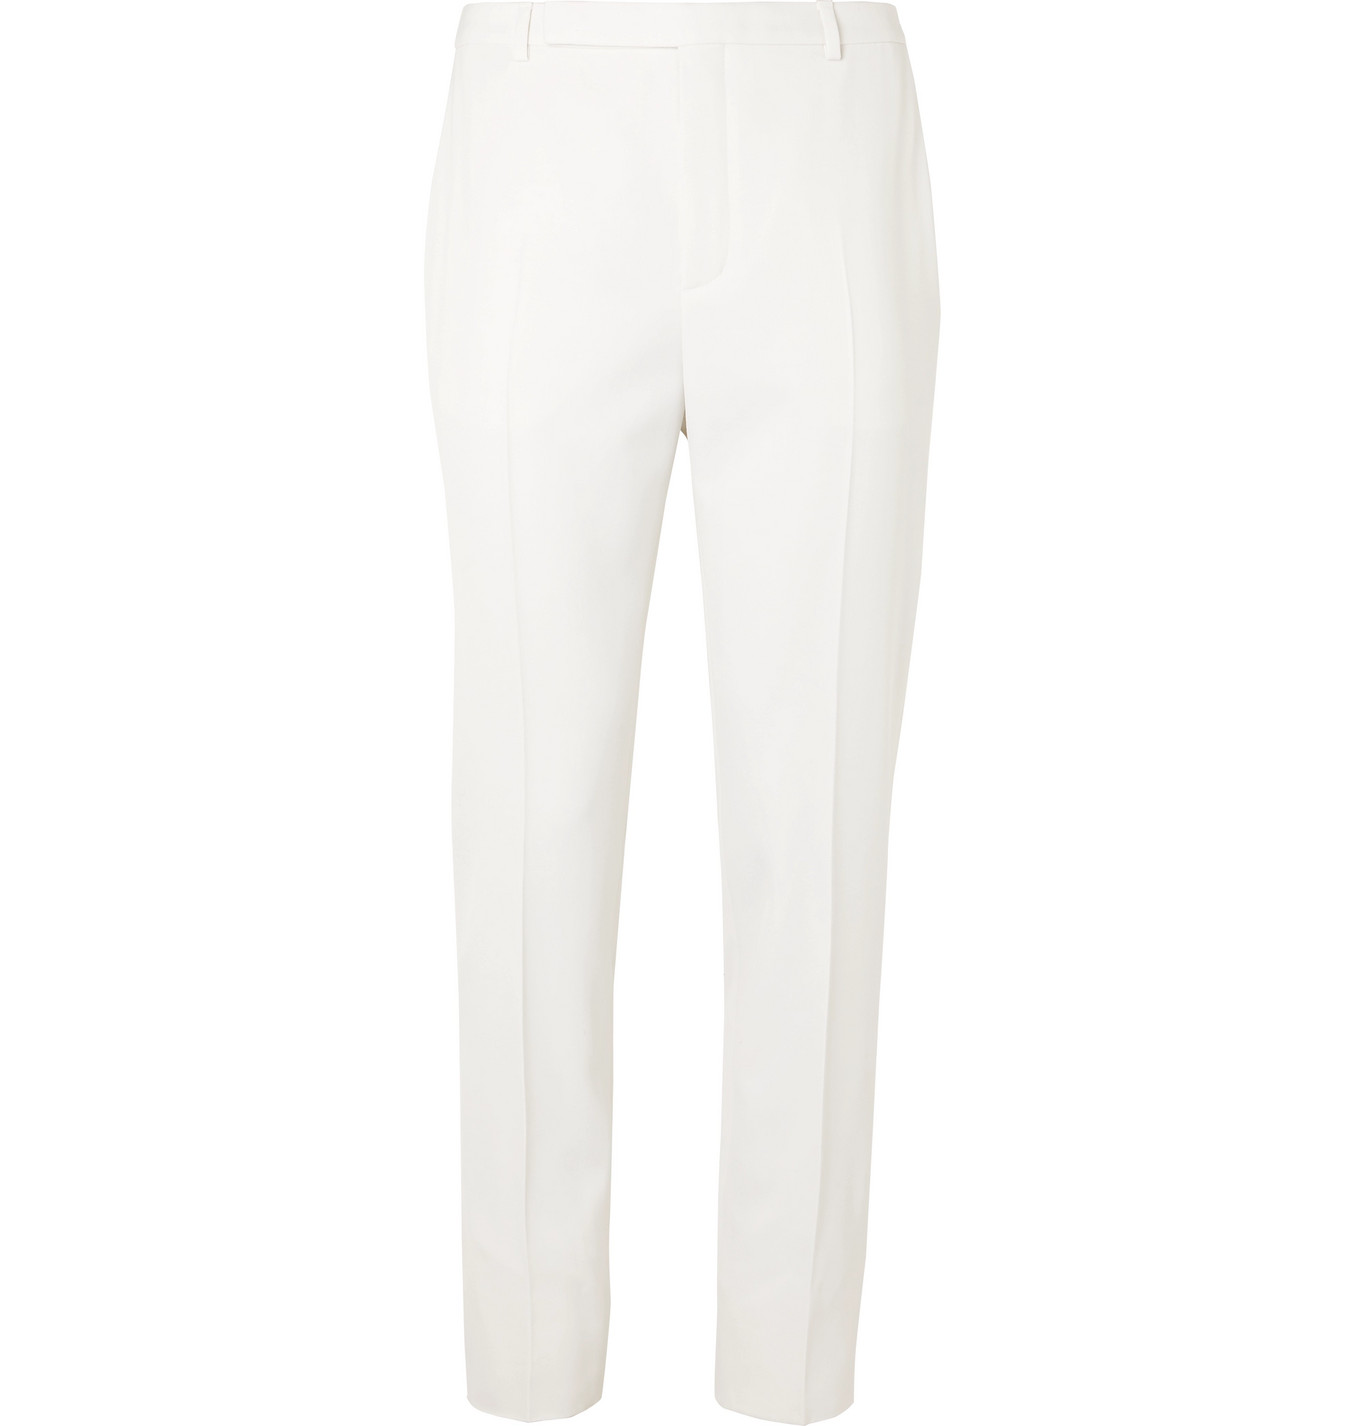 SAINT LAURENT - Ivory Slim-Fit Tapered Wool Suit Trousers - Men - White ...